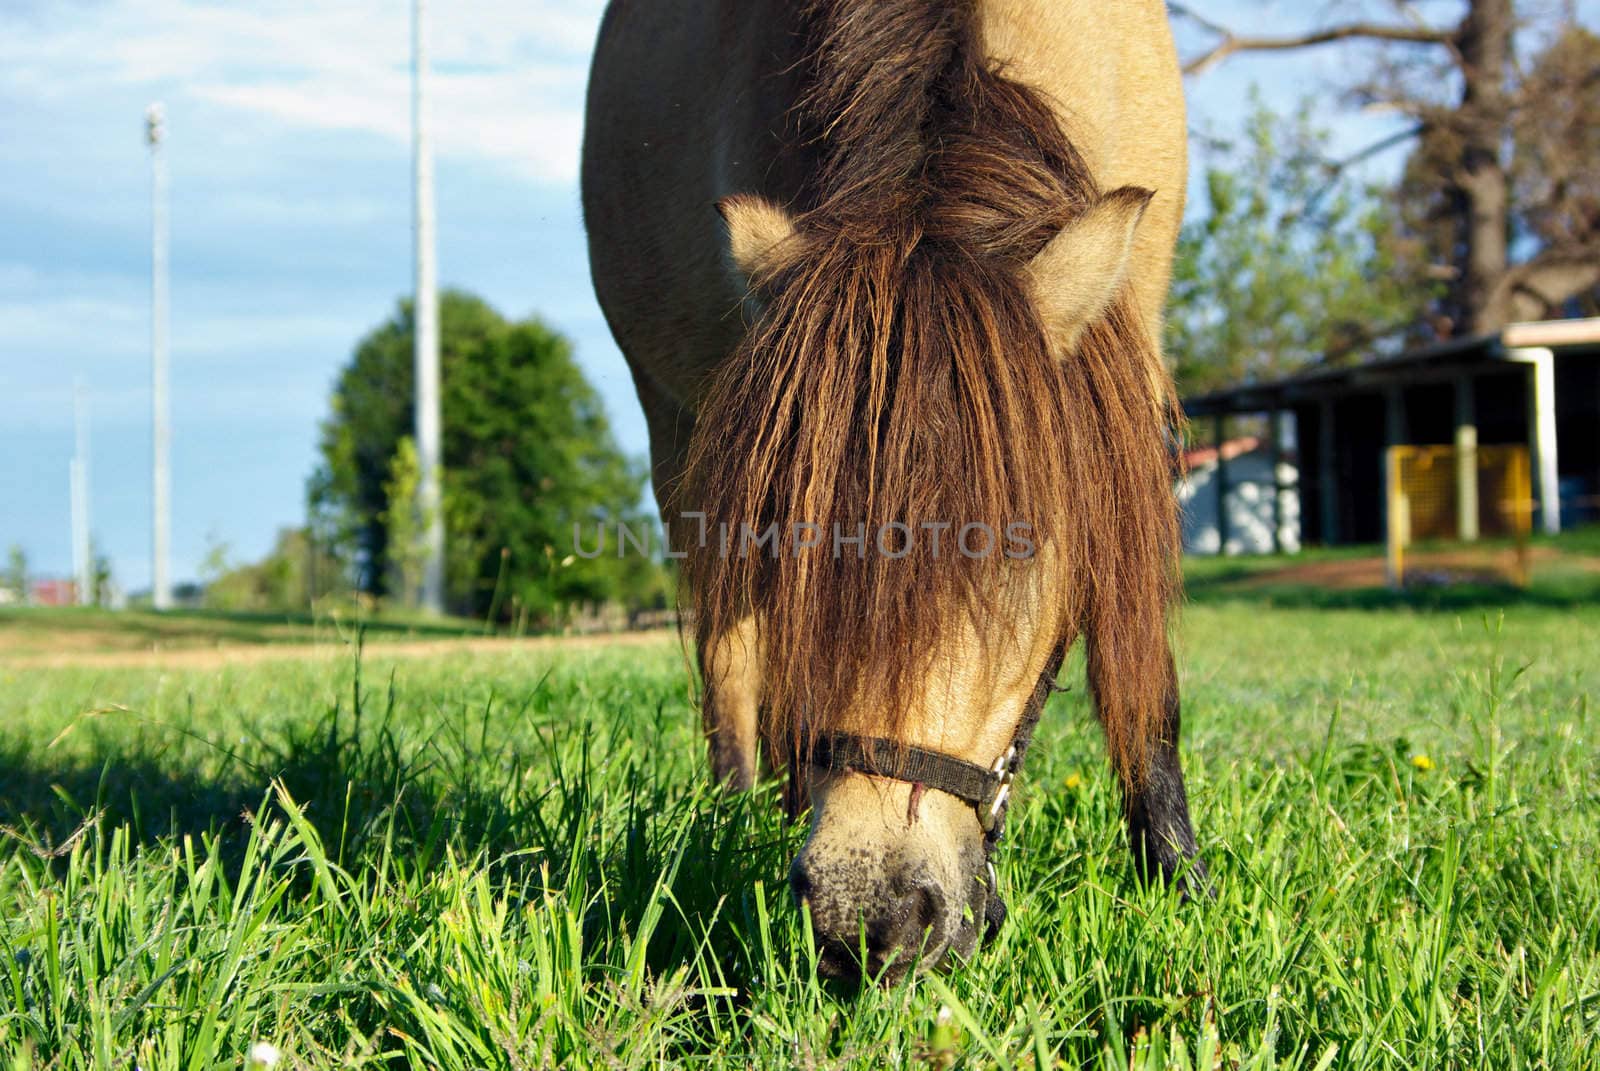 miniature horse with long mane eating grass